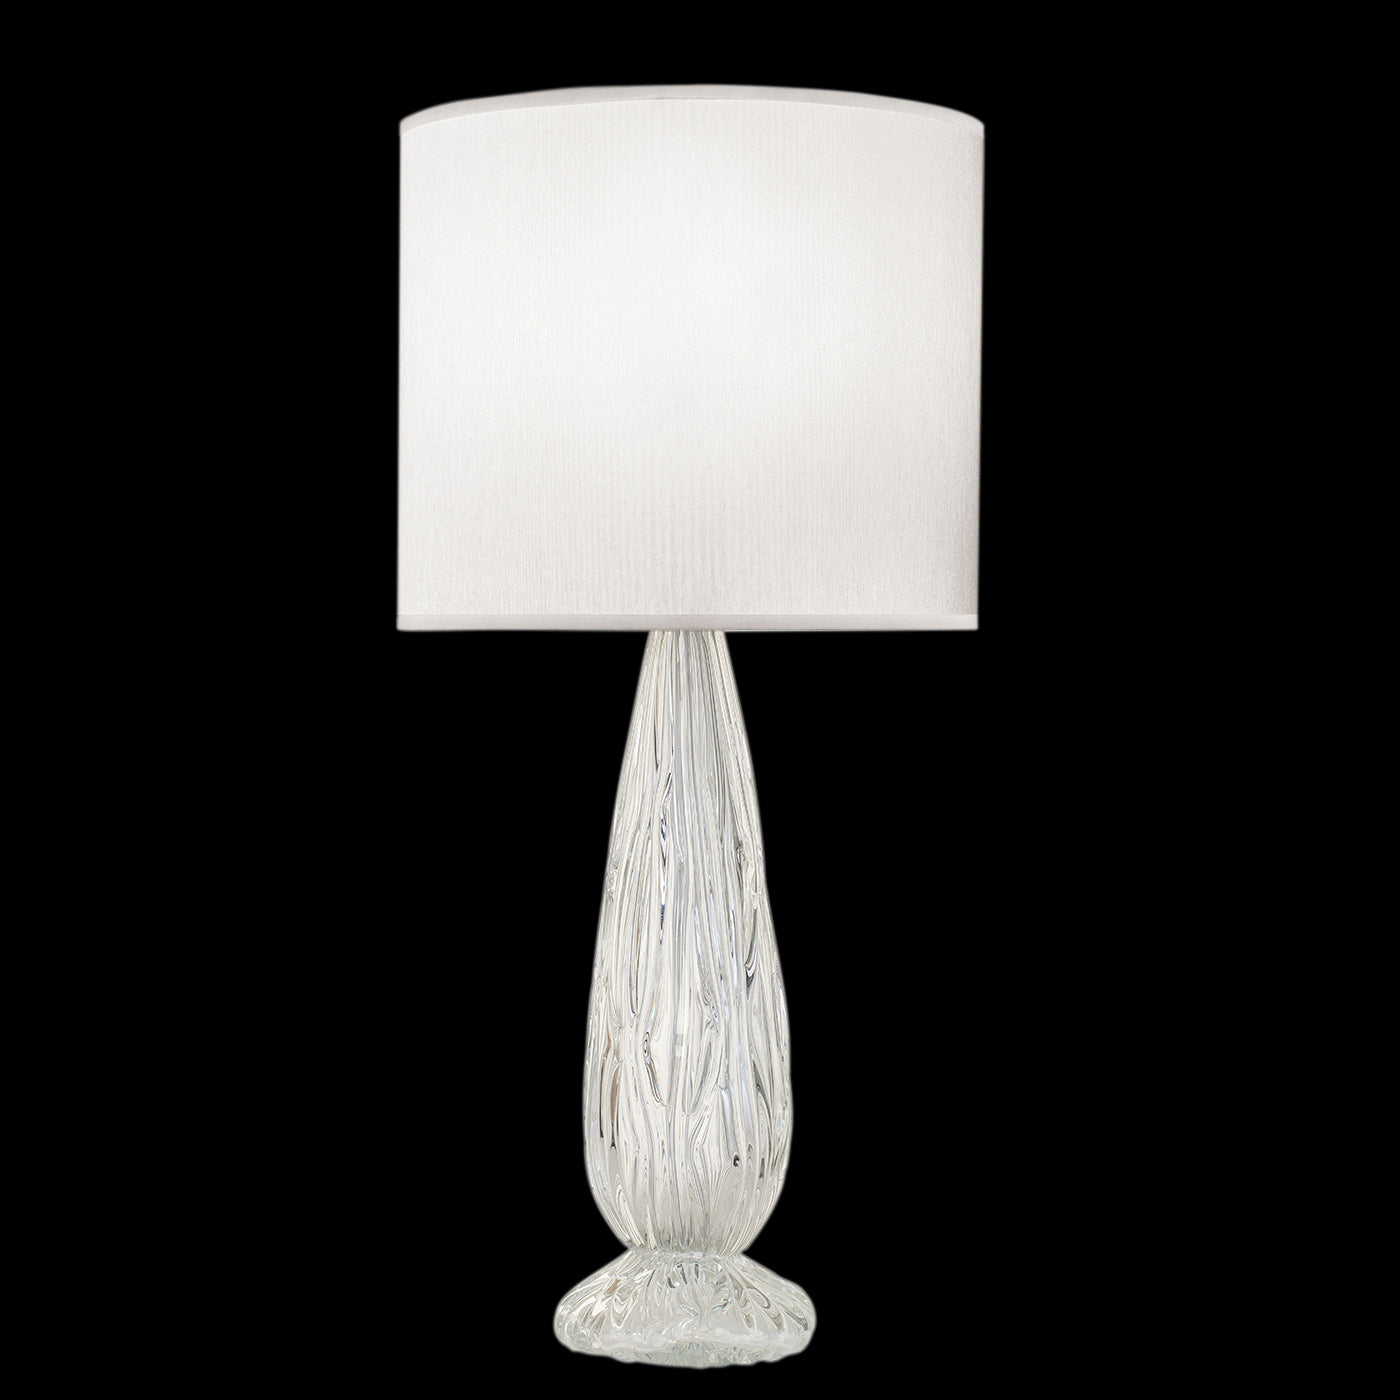 Fine Art Las Olas 30.5" Table Lamp Lamp Fine Art Handcrafted Lighting Silver with White Shade  